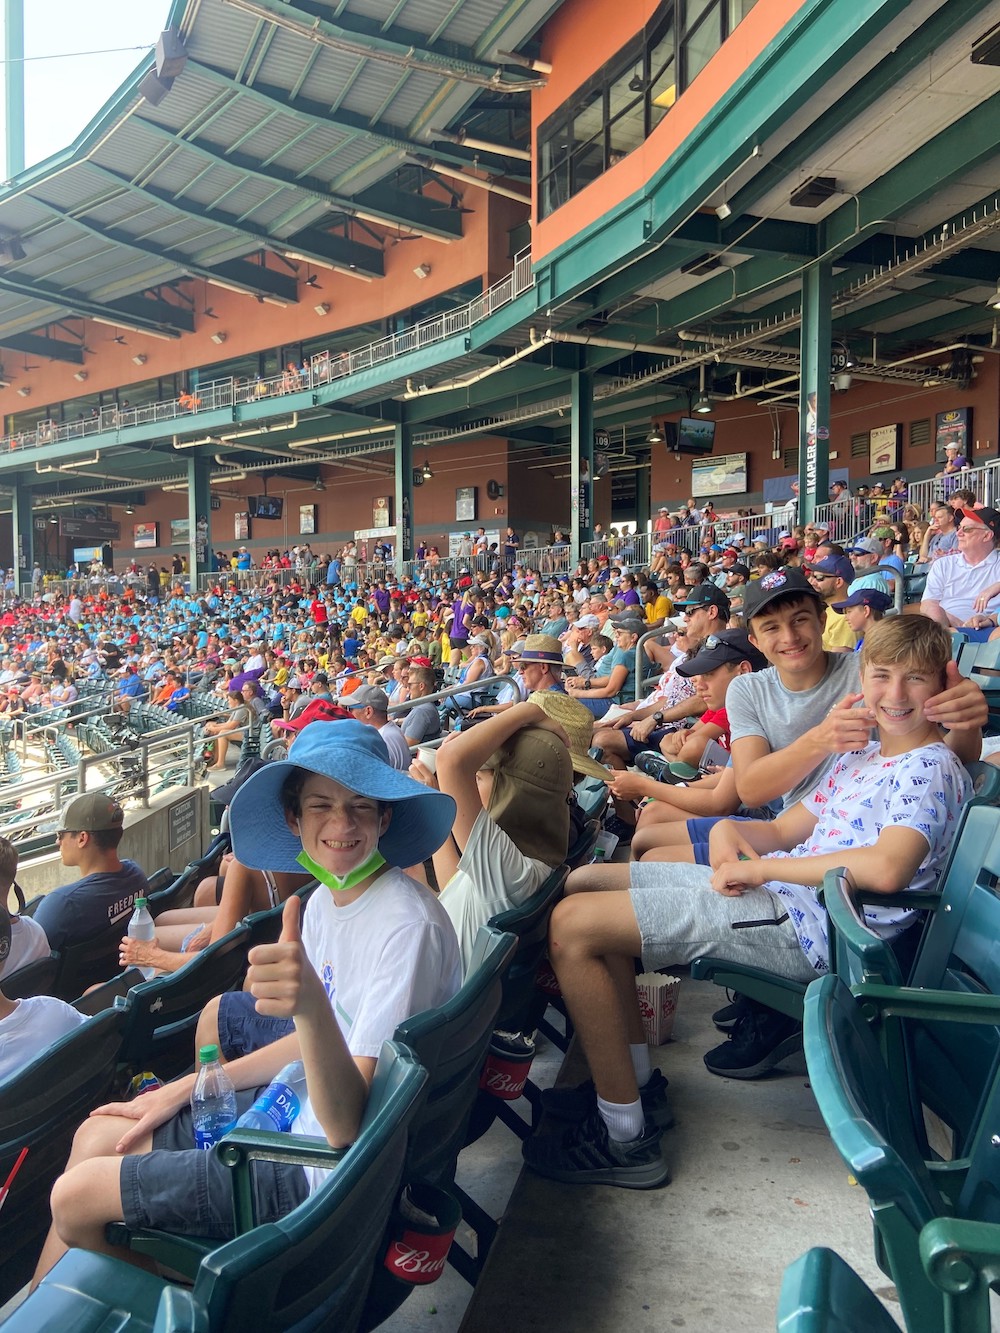 A group of people sitting in a baseball stadium.